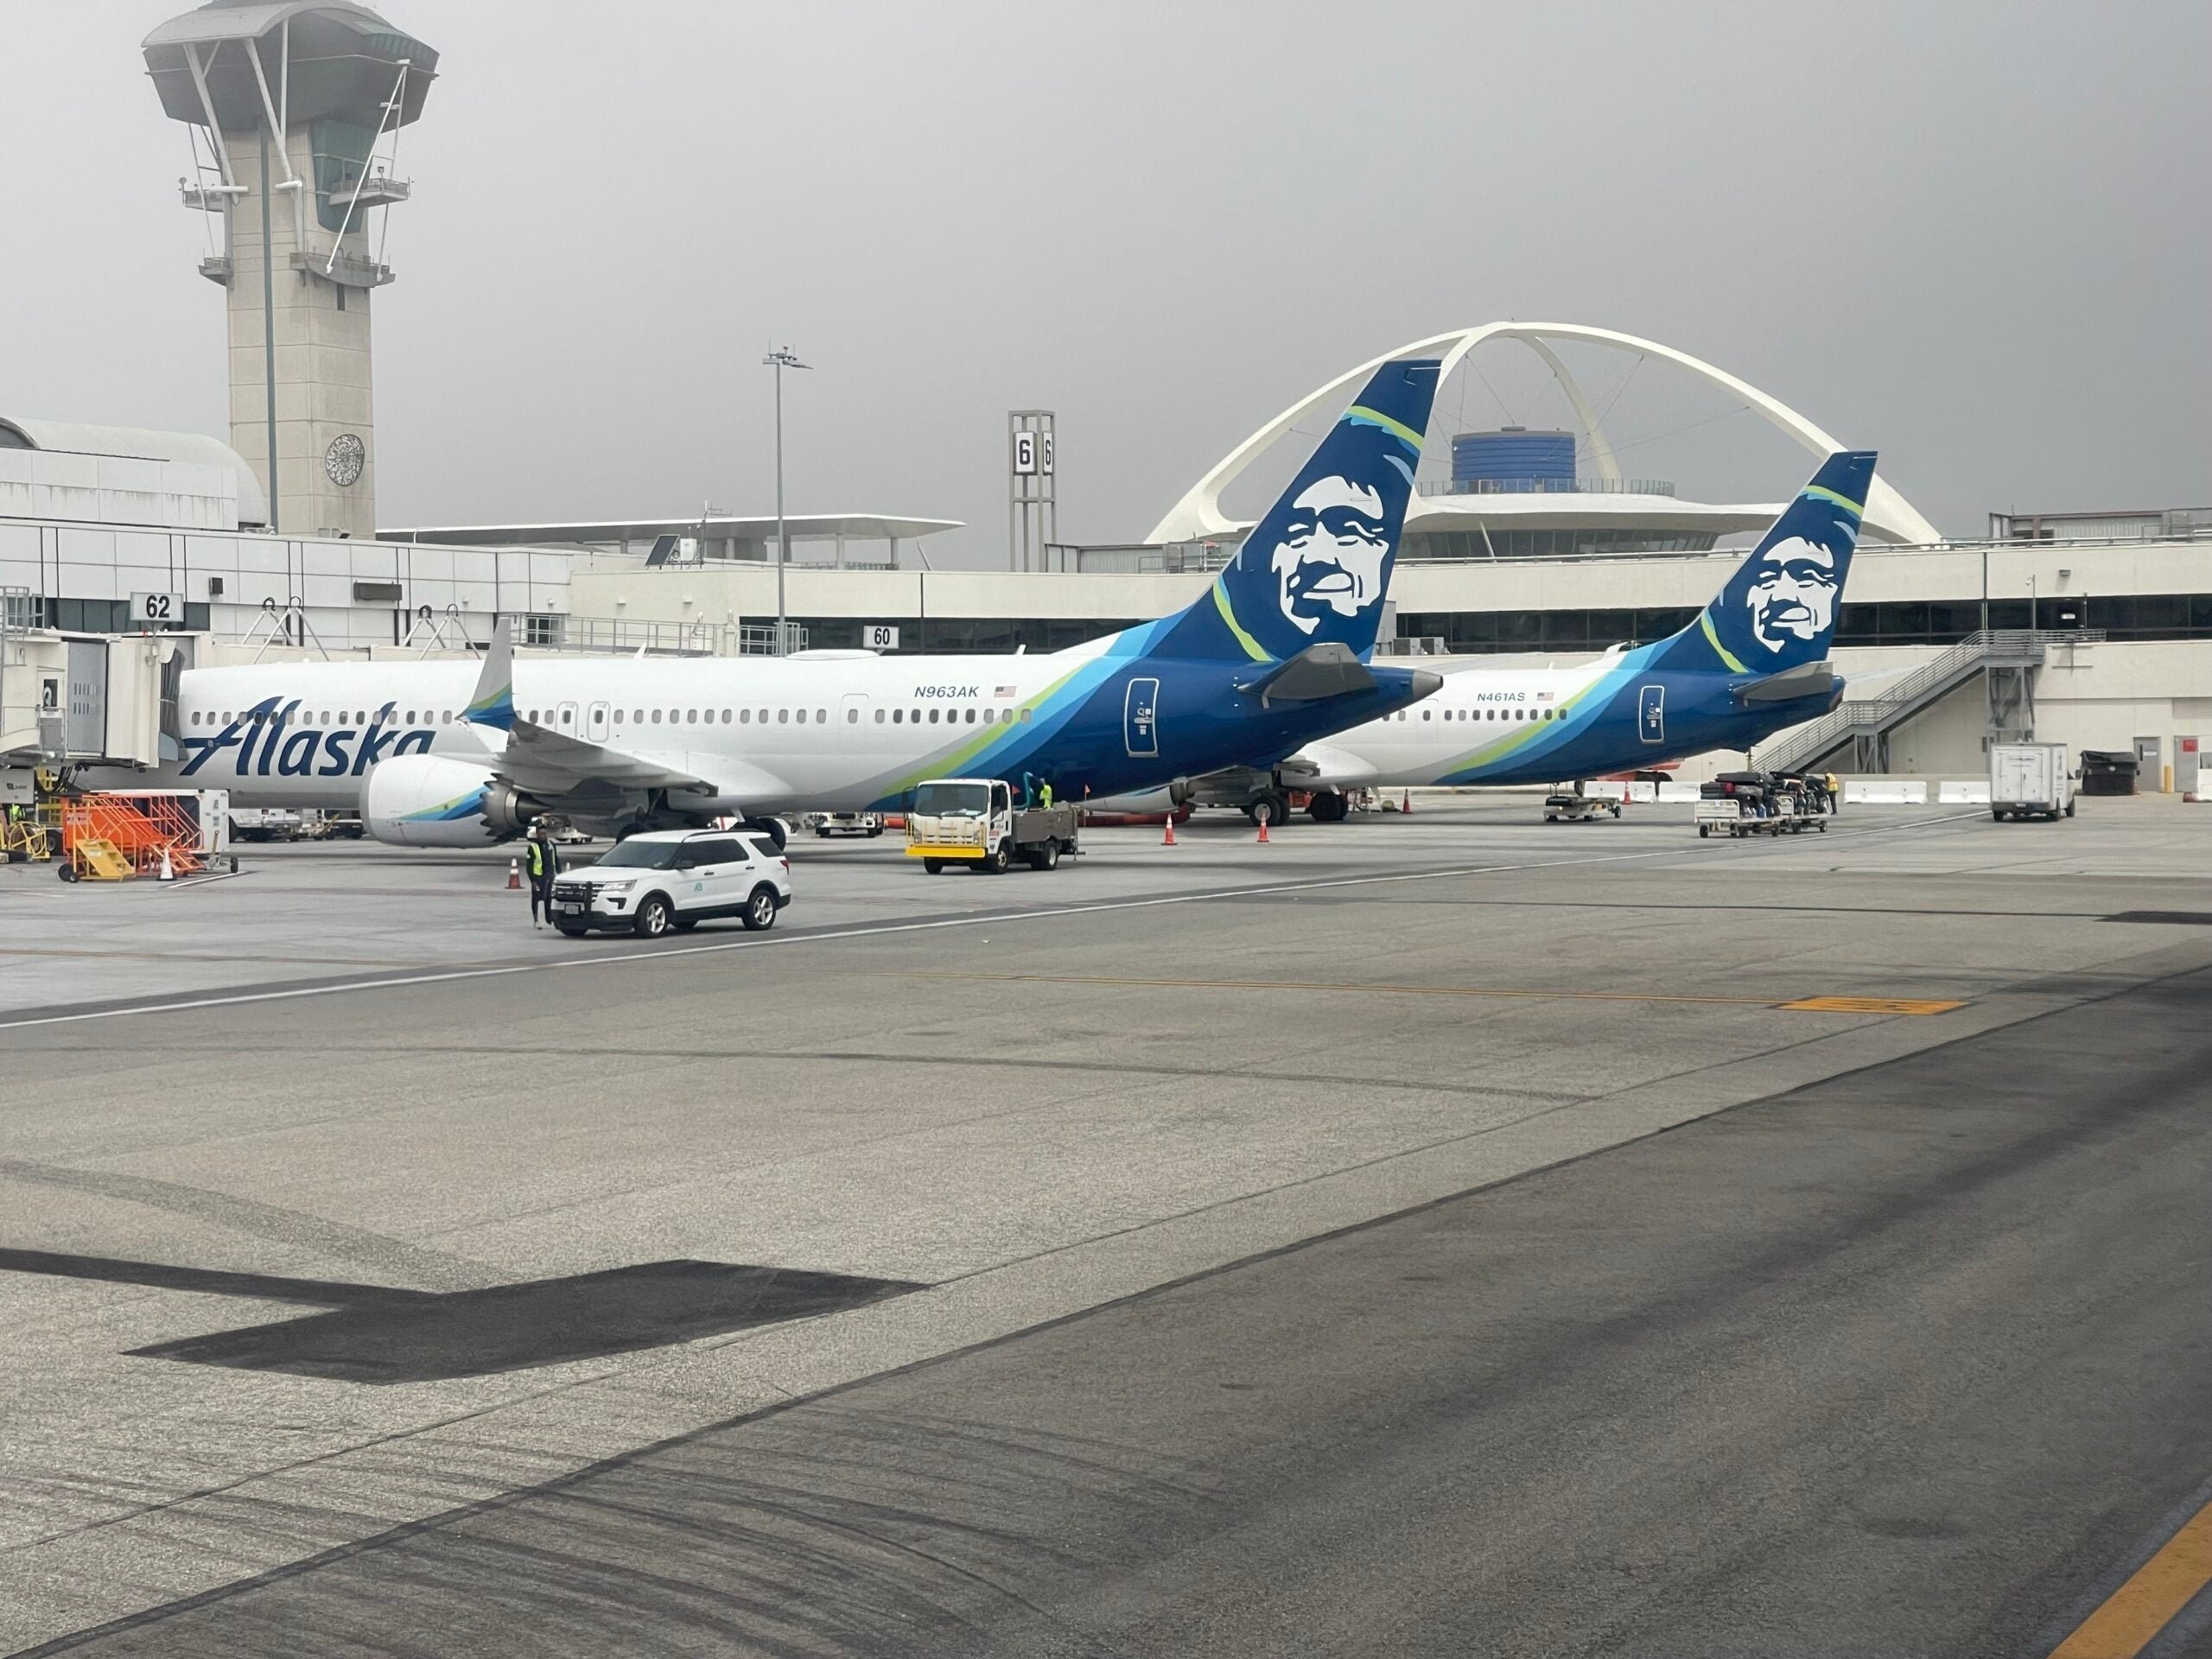 Alaska Airways to fly solely nonstop route between Nashville and Portland, Oregon